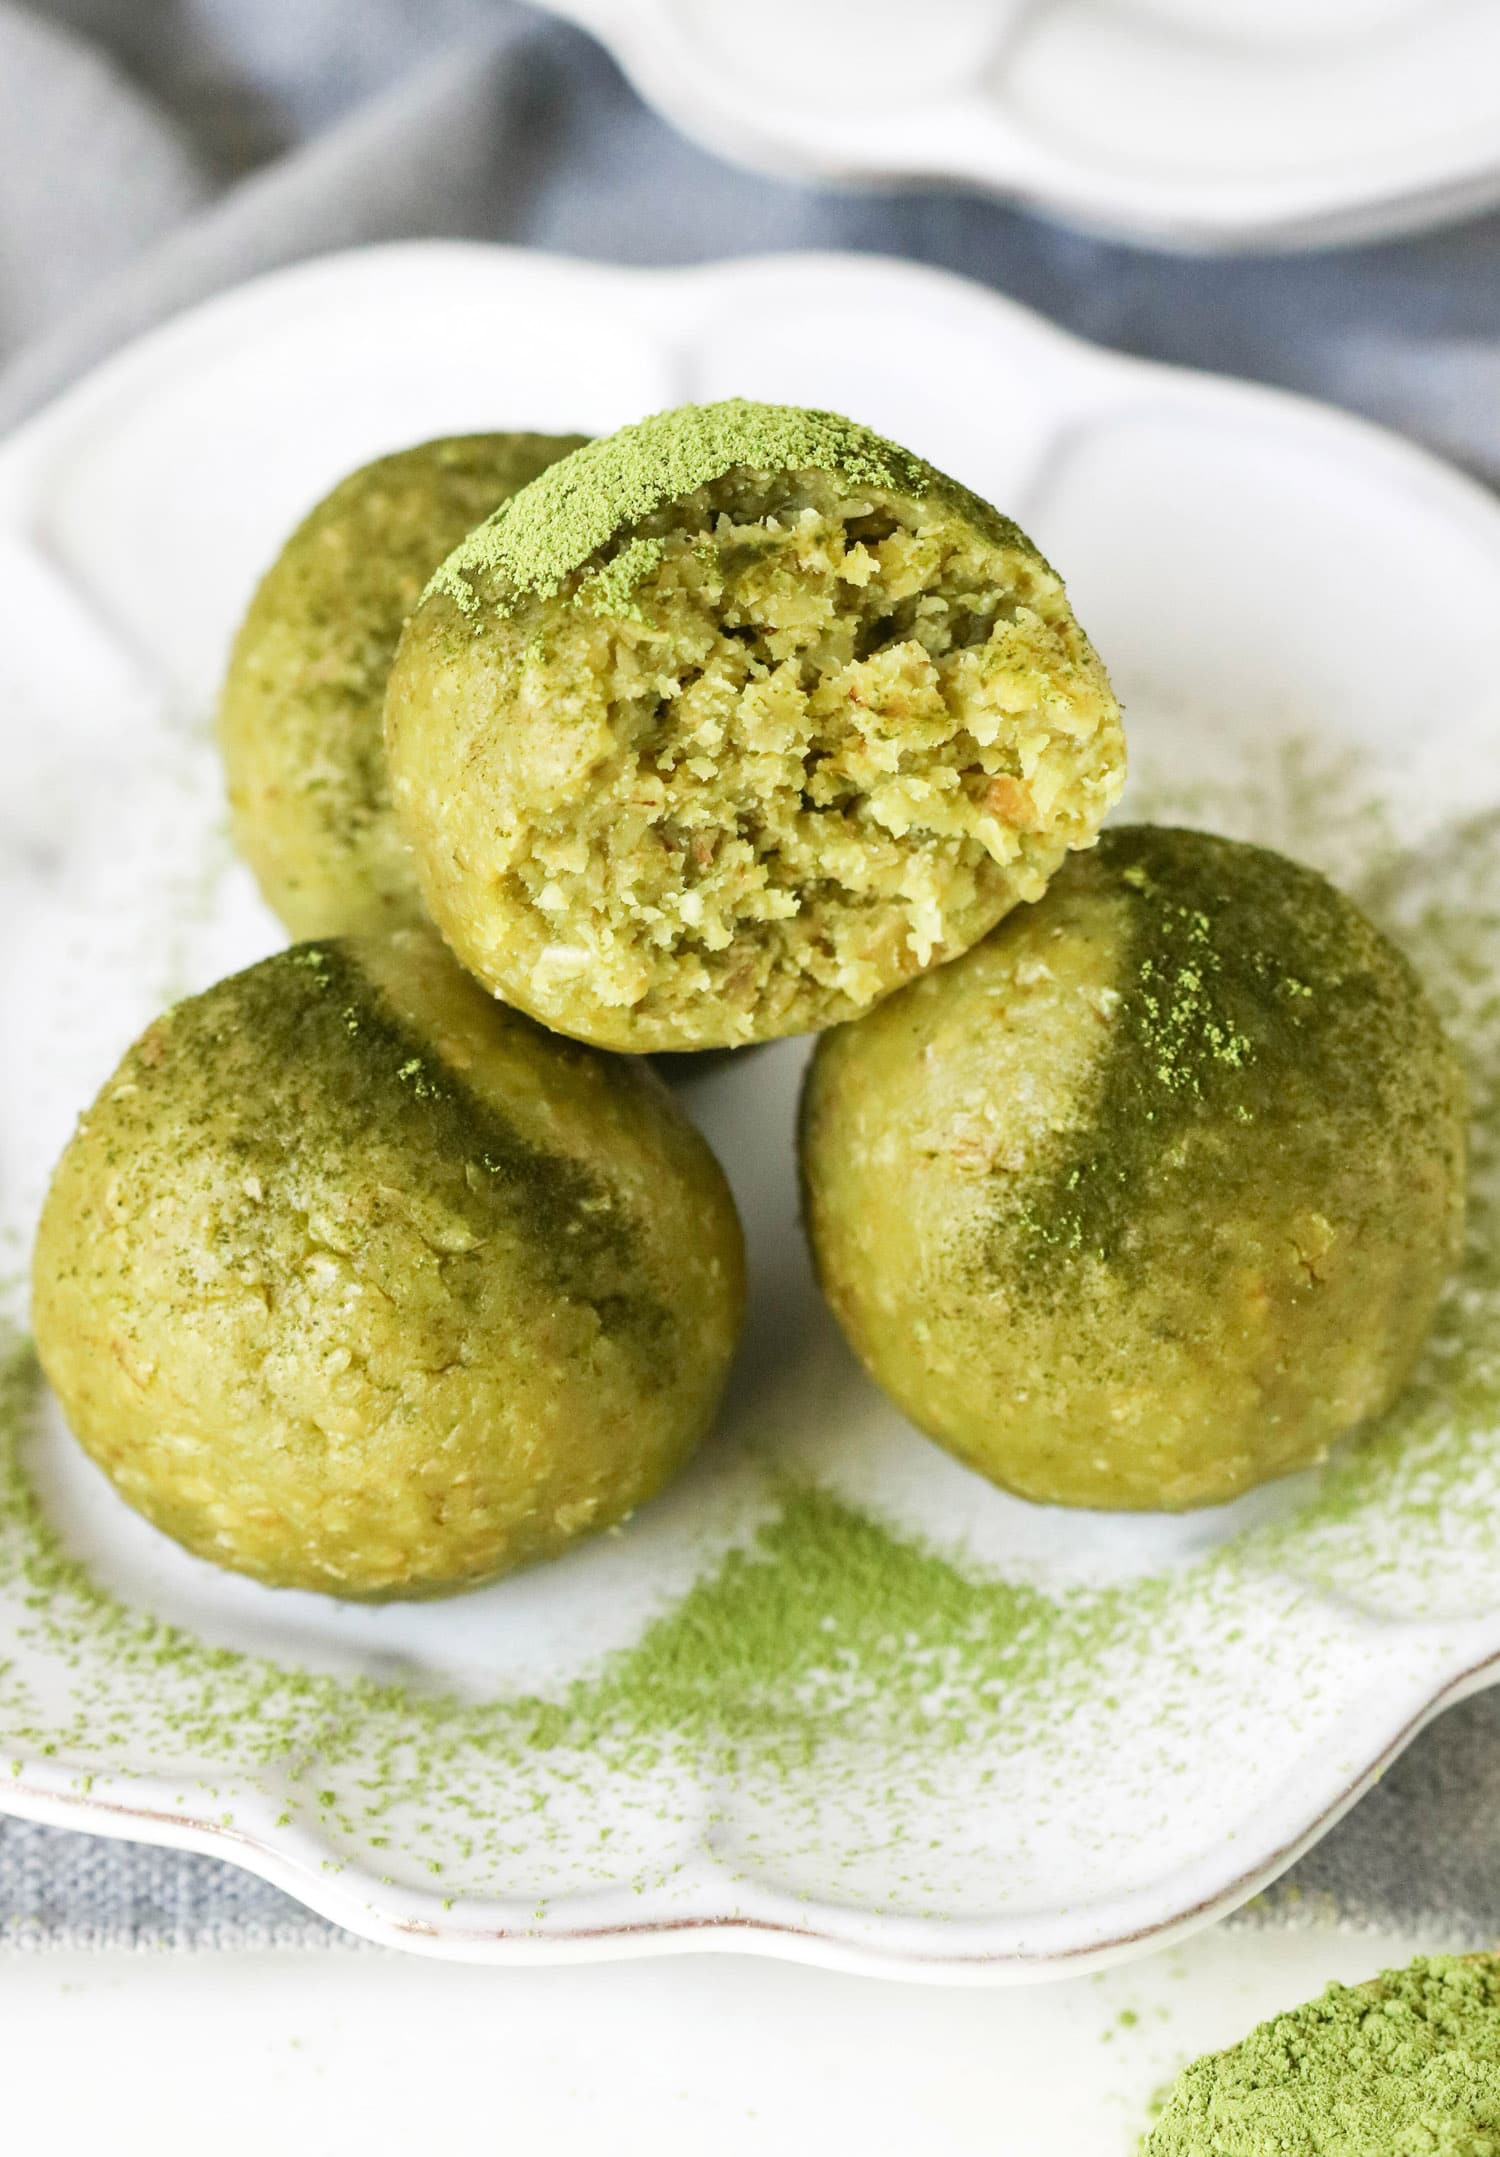 These Matcha Green Tea Energy Bites are soft, fudgy, sweet -- they're a real guilt-free treat. Made with nut butter, oats, and matcha powder. You'd never know they're sugar free, gluten free, dairy free, vegan, and keto-friendly too!